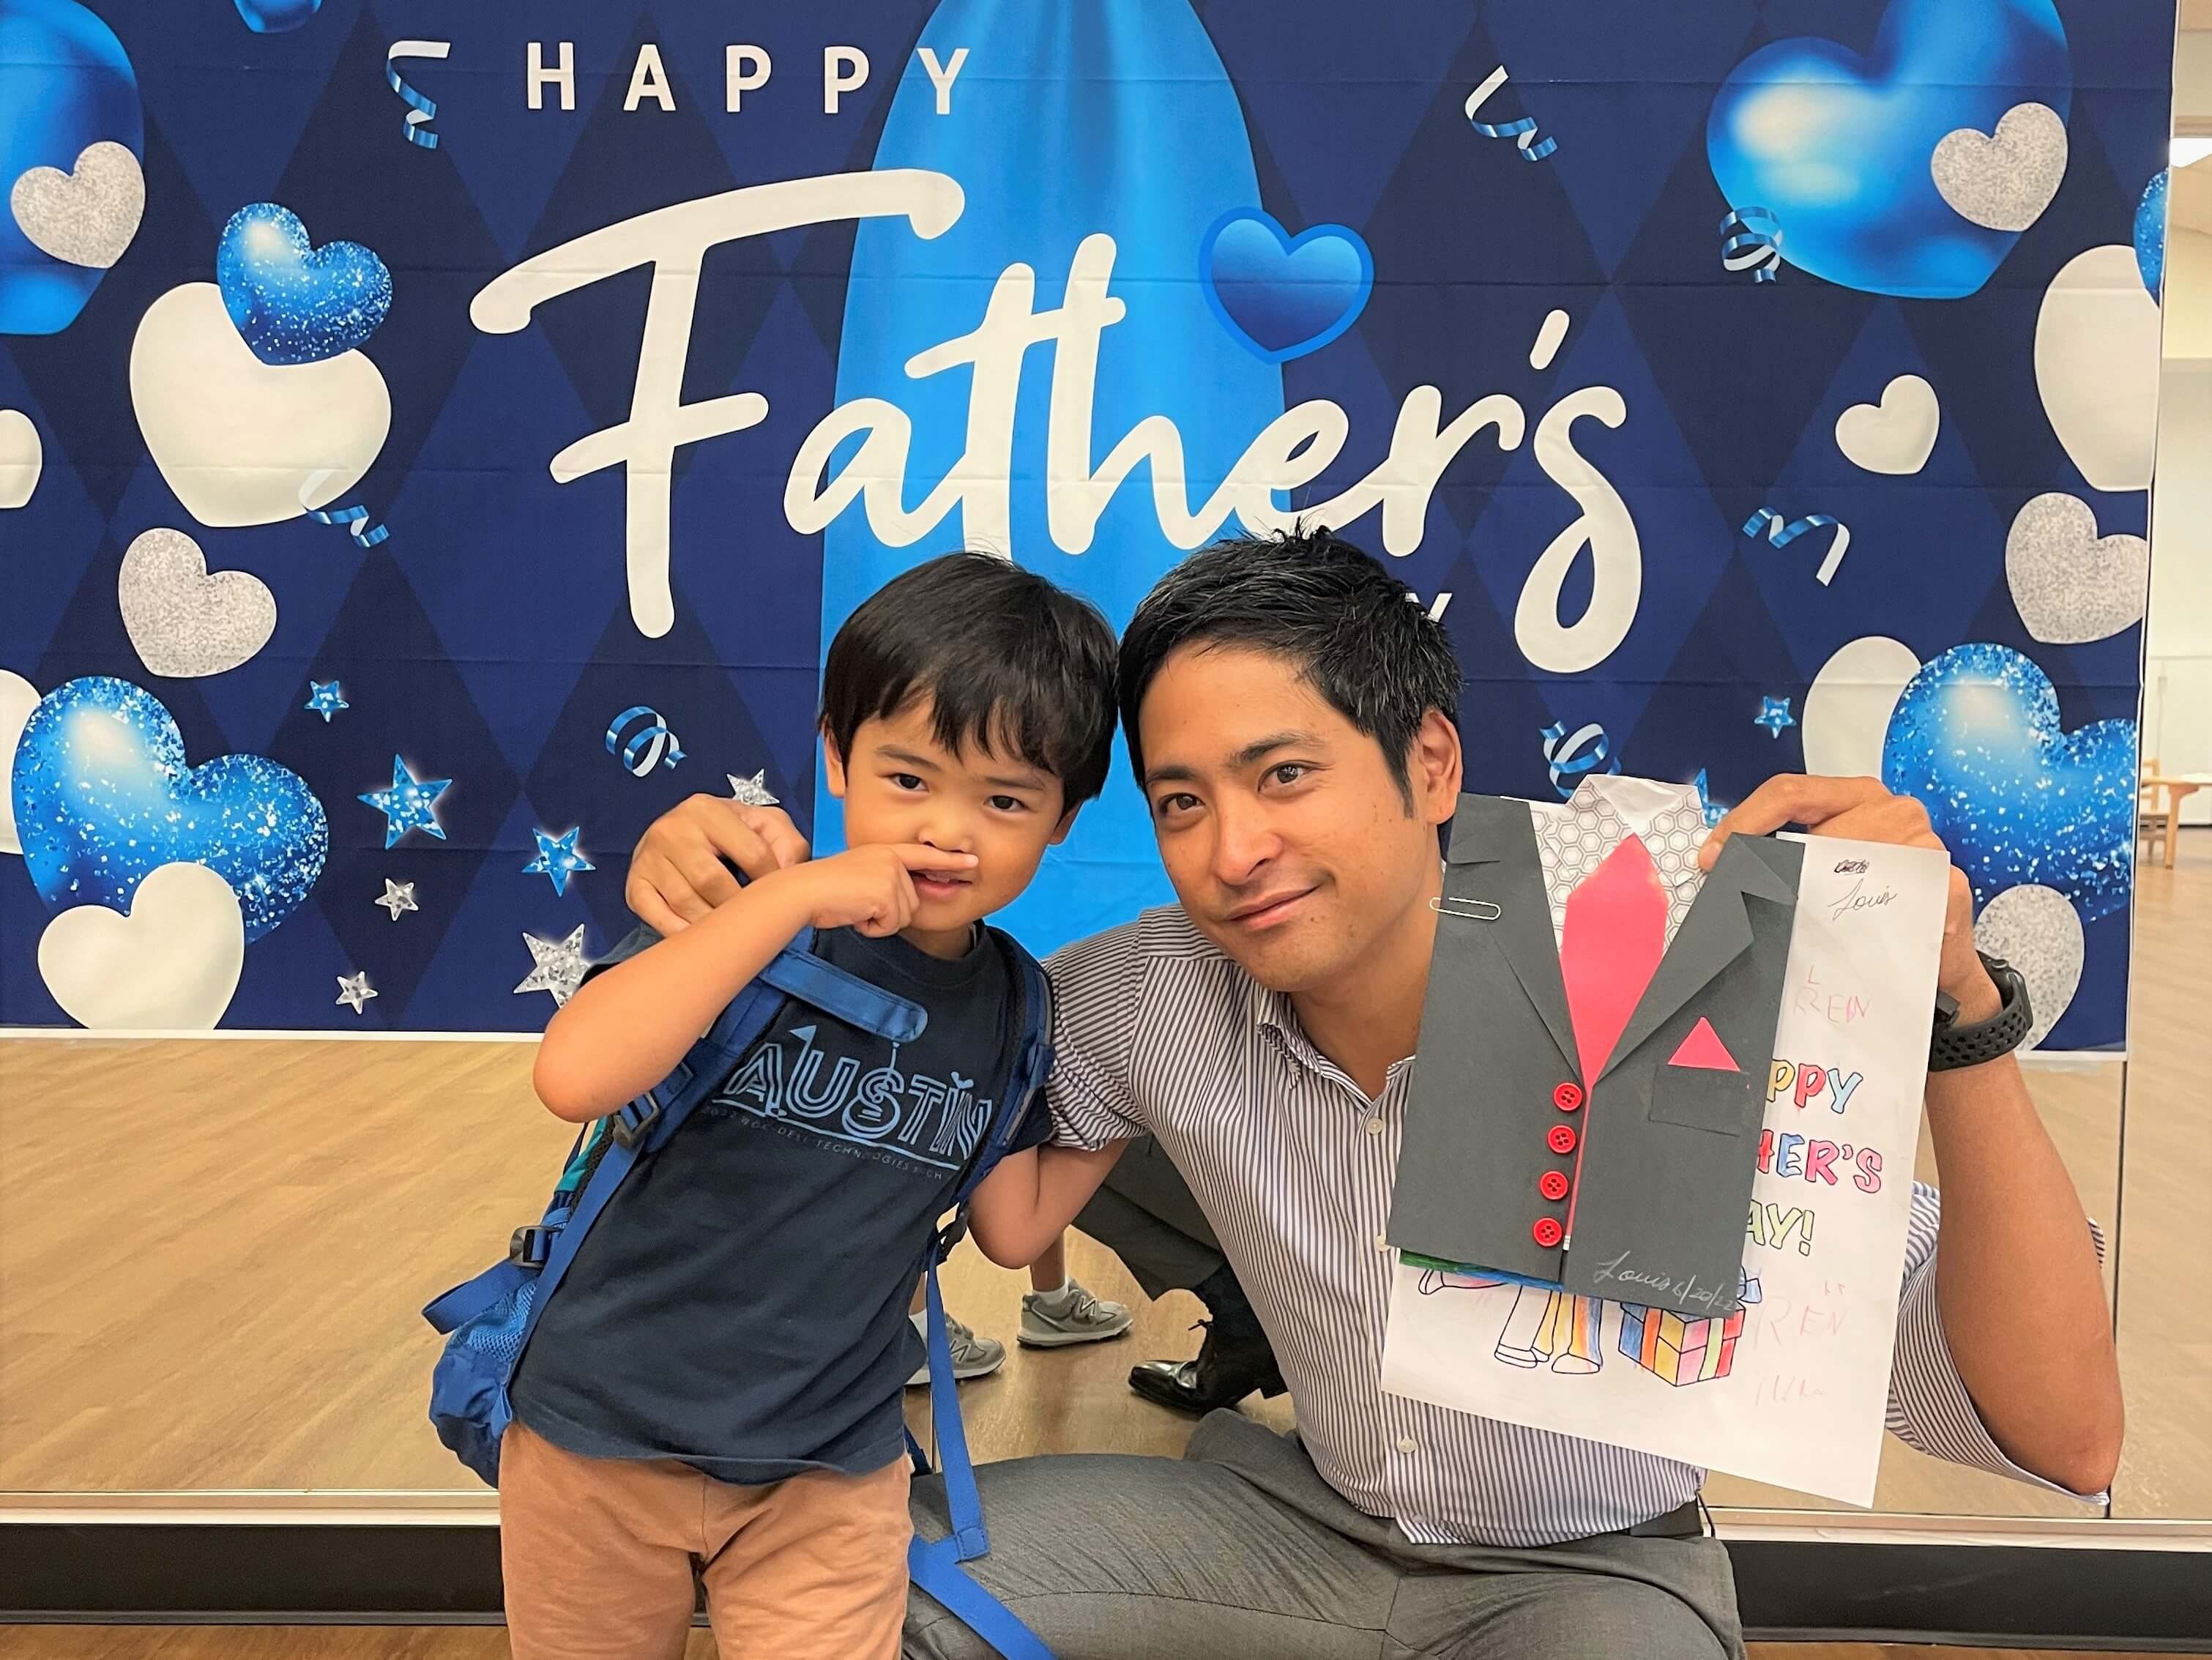 Ren with son on fathers day